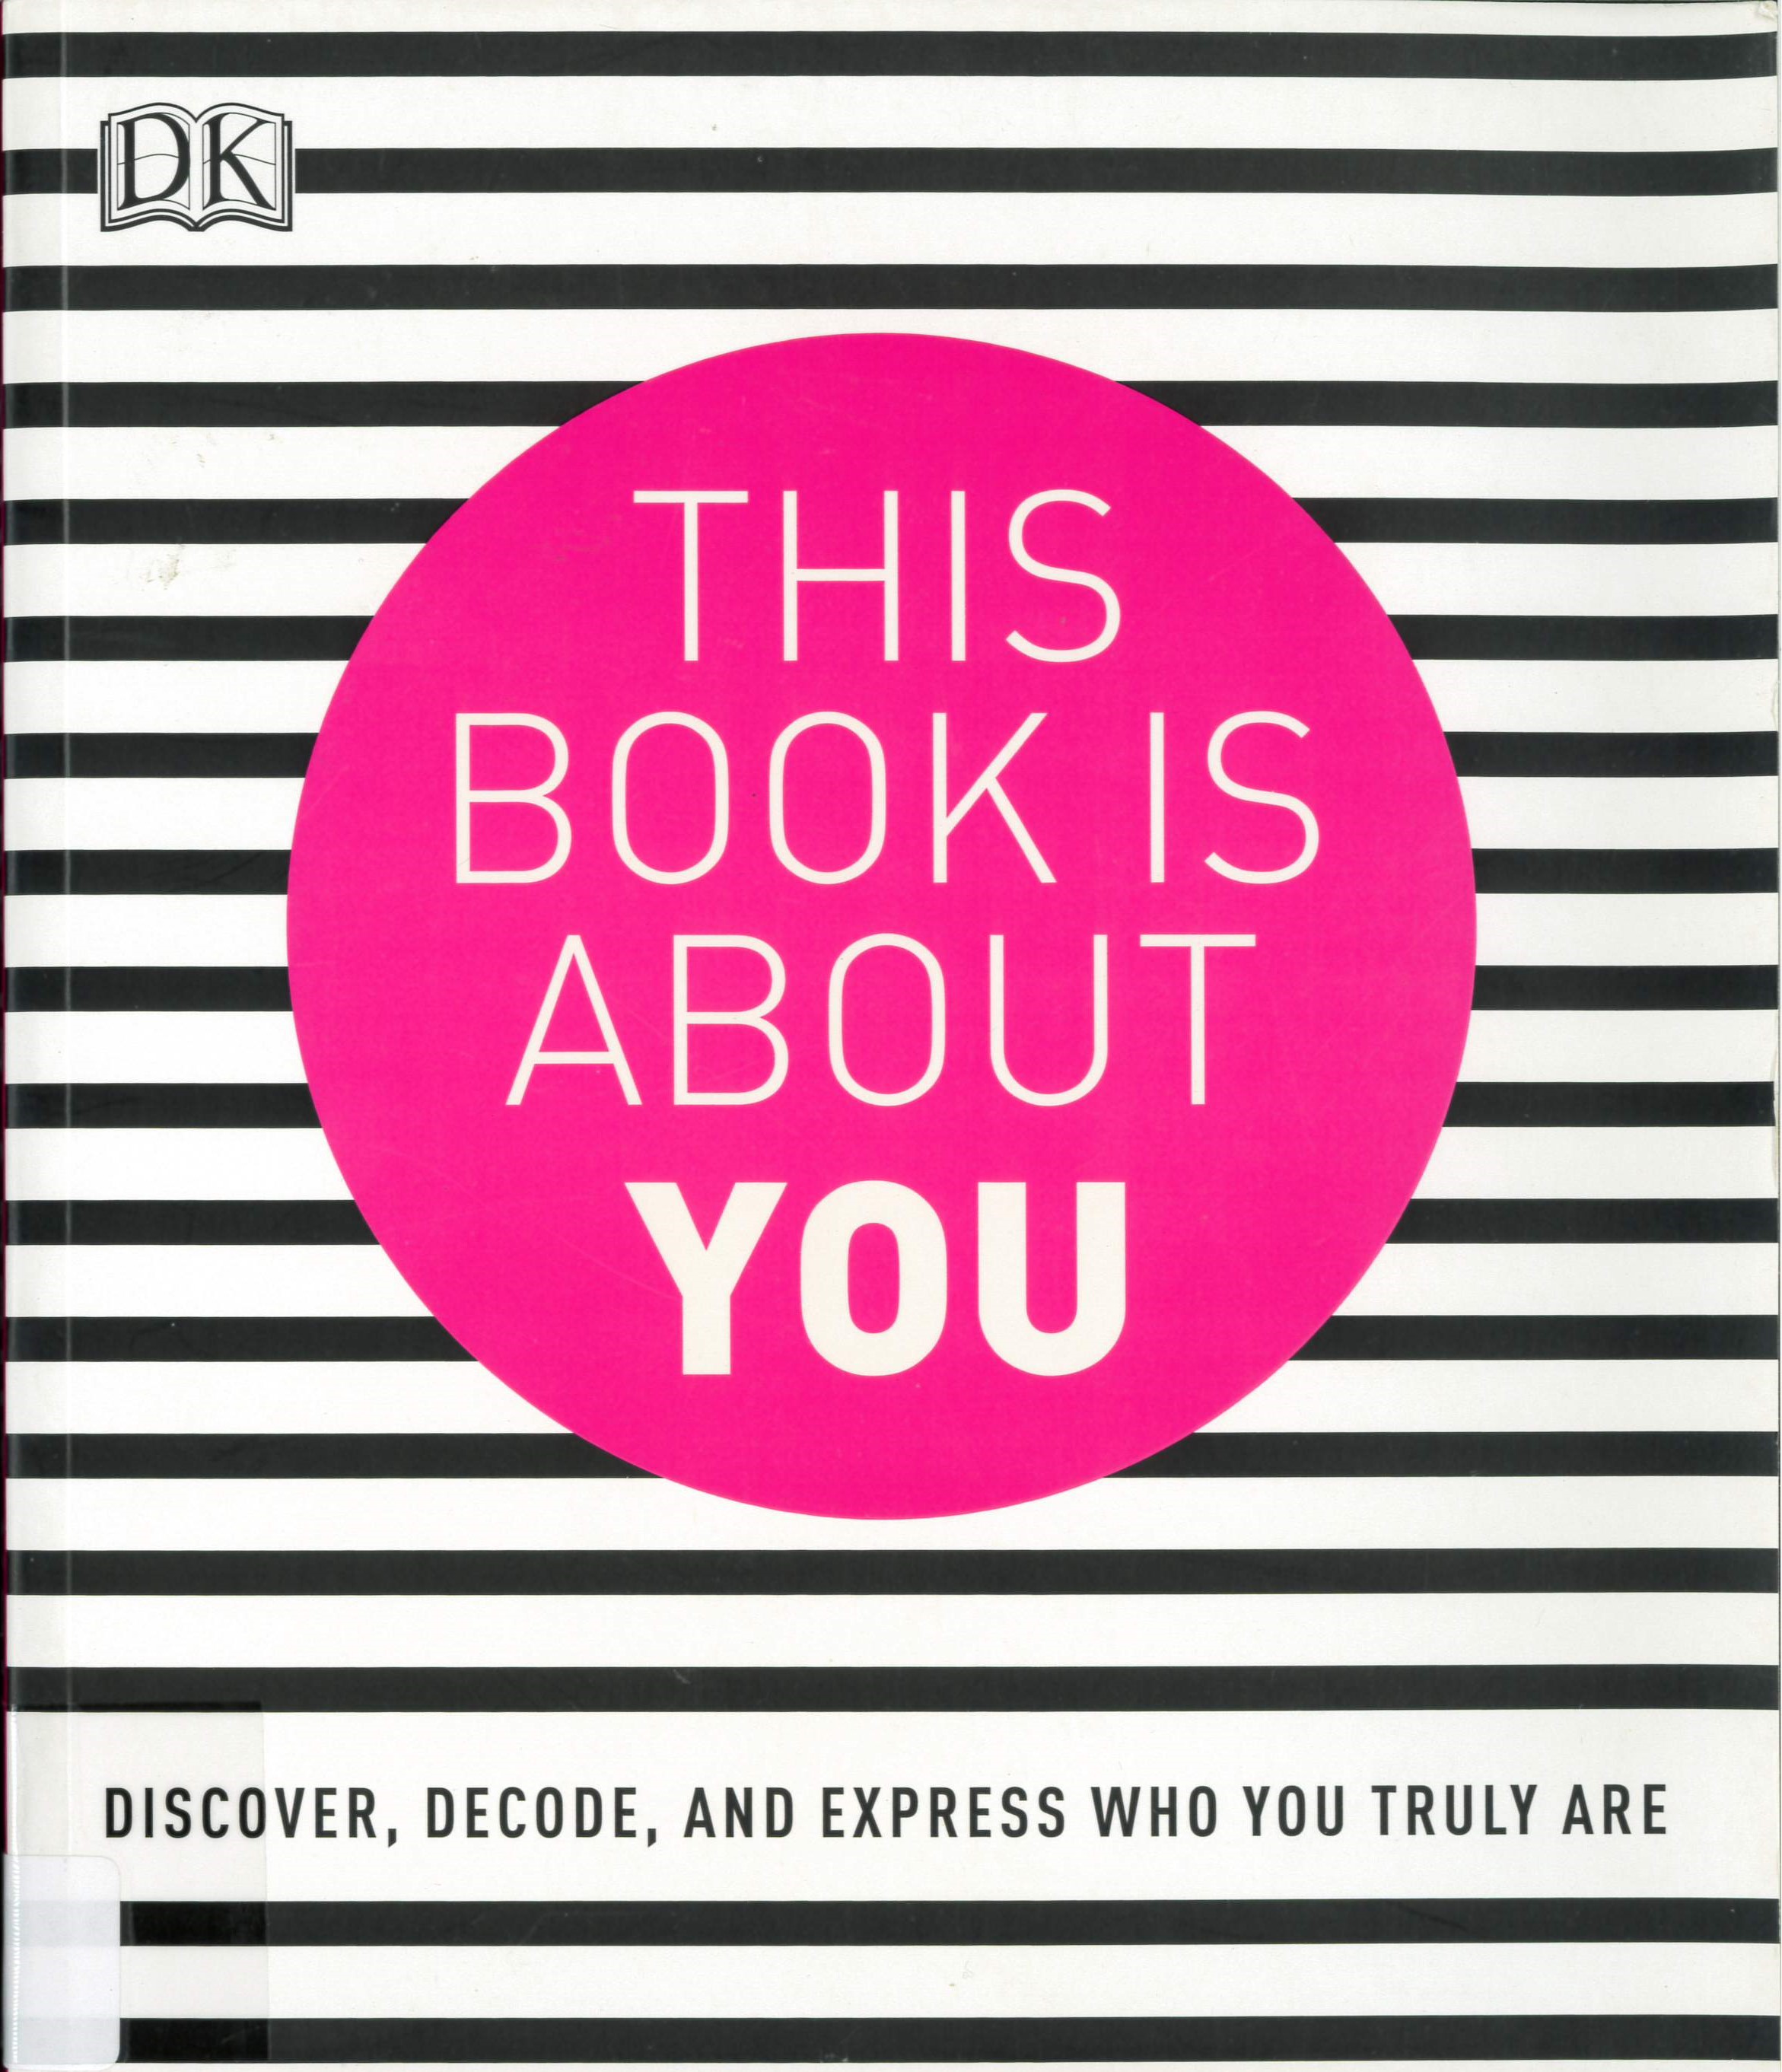 This book is about you /